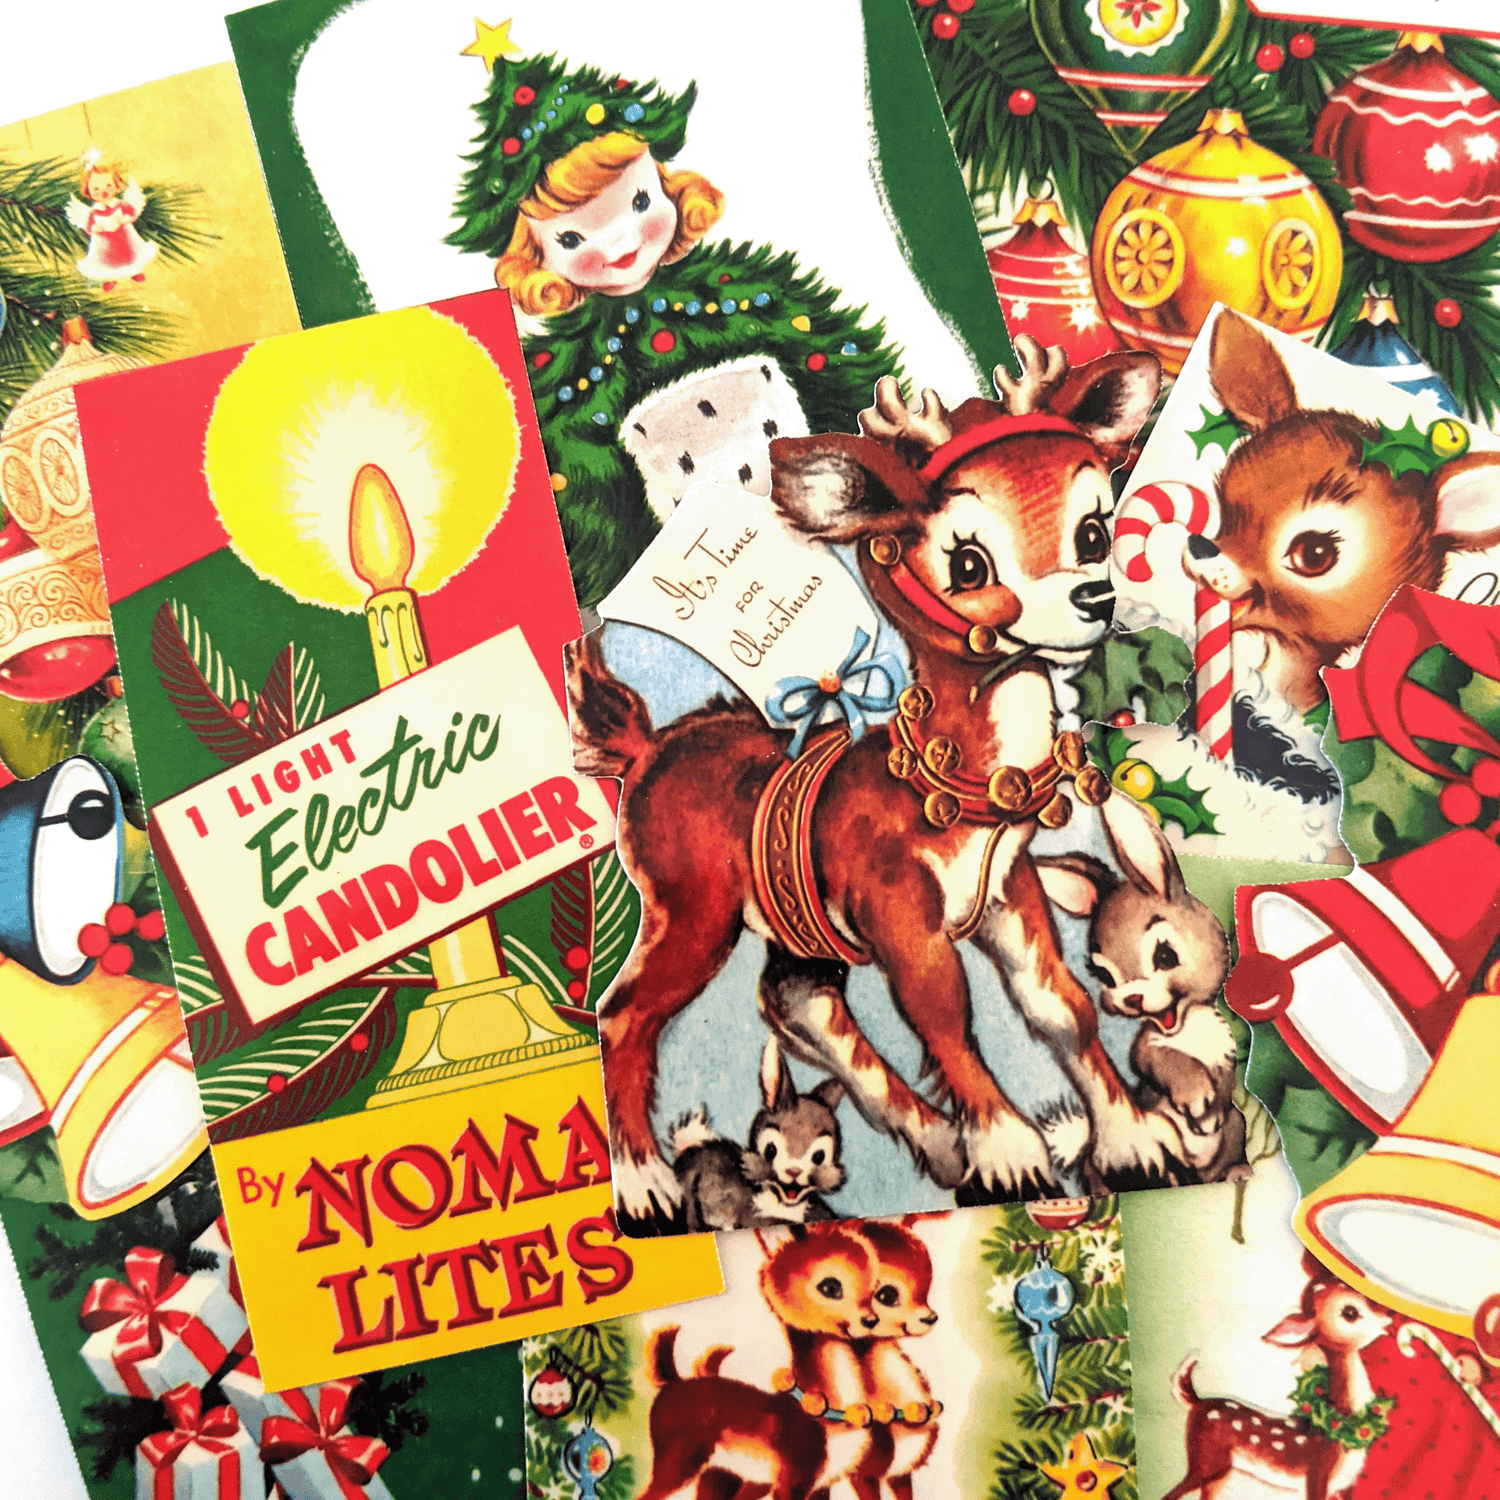 Vintage Christmas Scrapbook Stickers Graphic by art.rm · Creative Fabrica